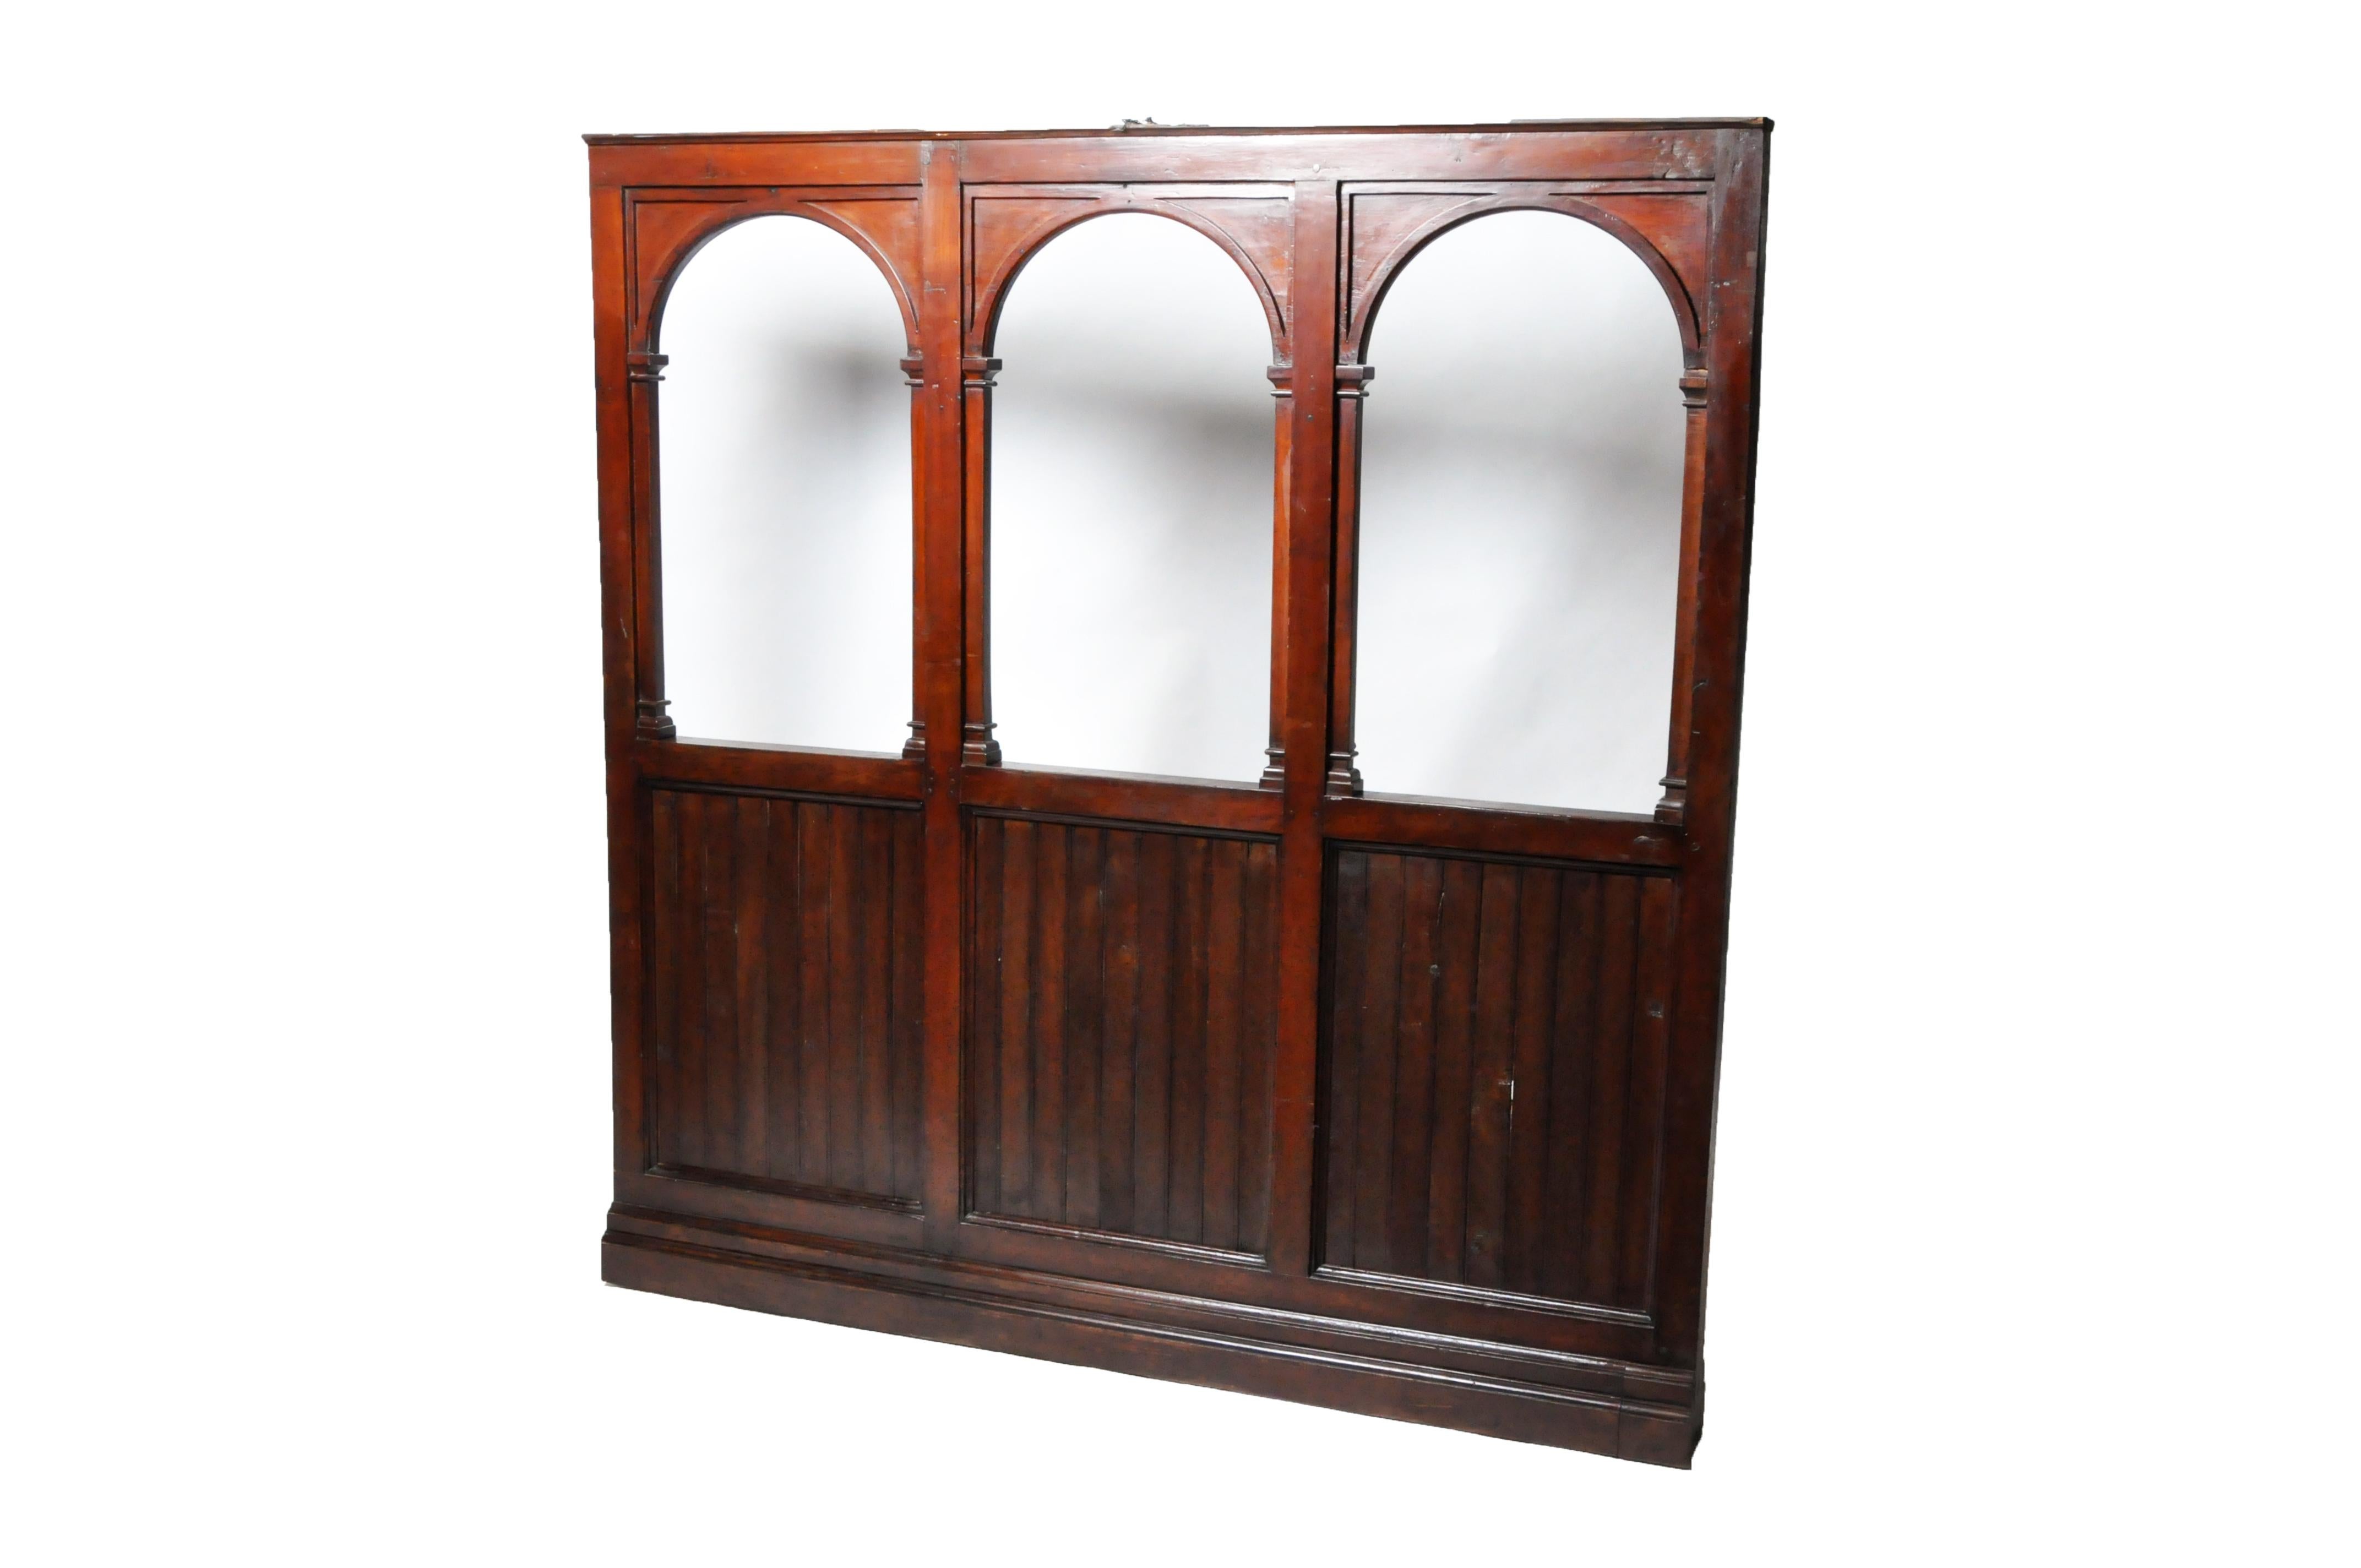 This arched teak wall was once part of the interior architecture of a Burmese veranda house. These large and elegant structures were built in the colonial cities of Rangoon and Mandalay during the 19th and 20th centuries. Veranda houses usually had